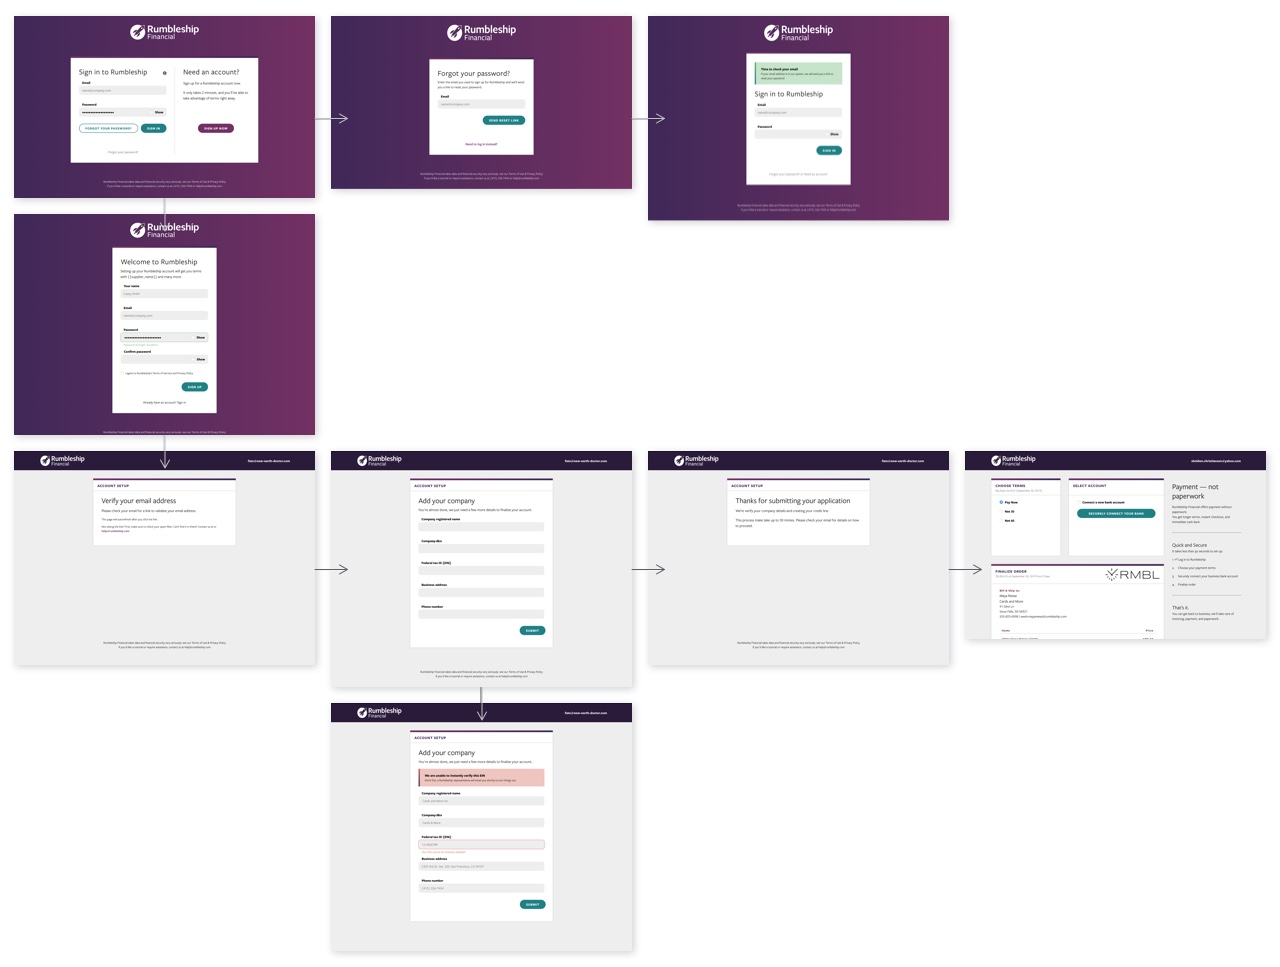 The final flow for the first version of onboarding